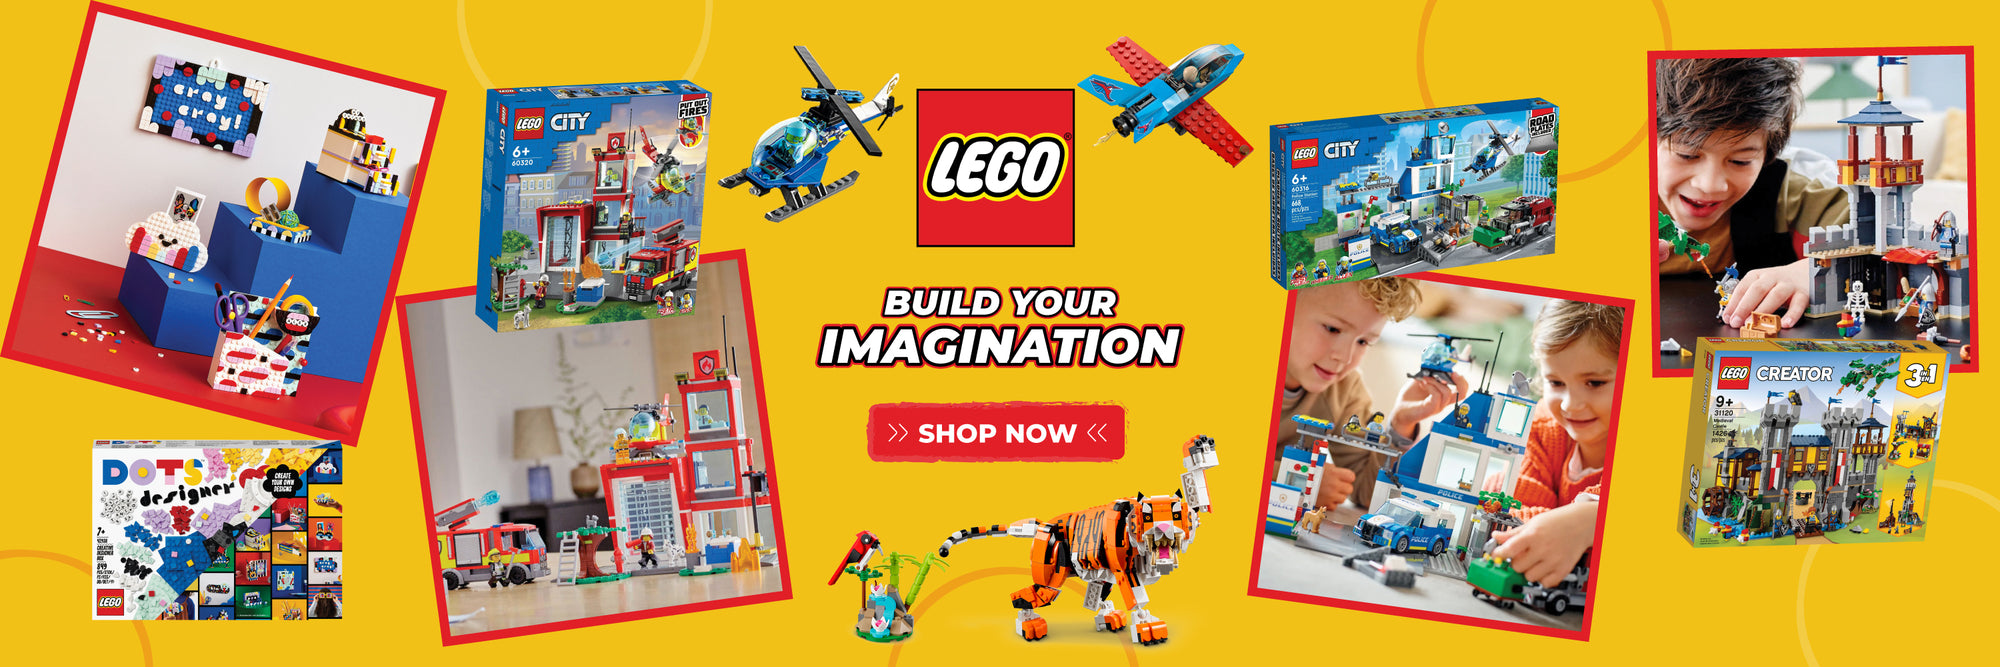 Lego Toys- Buy Lego Toys Online at Best Prices in India - Shop Online for Toys Store - Free Home Delivery at Toycra.com. 